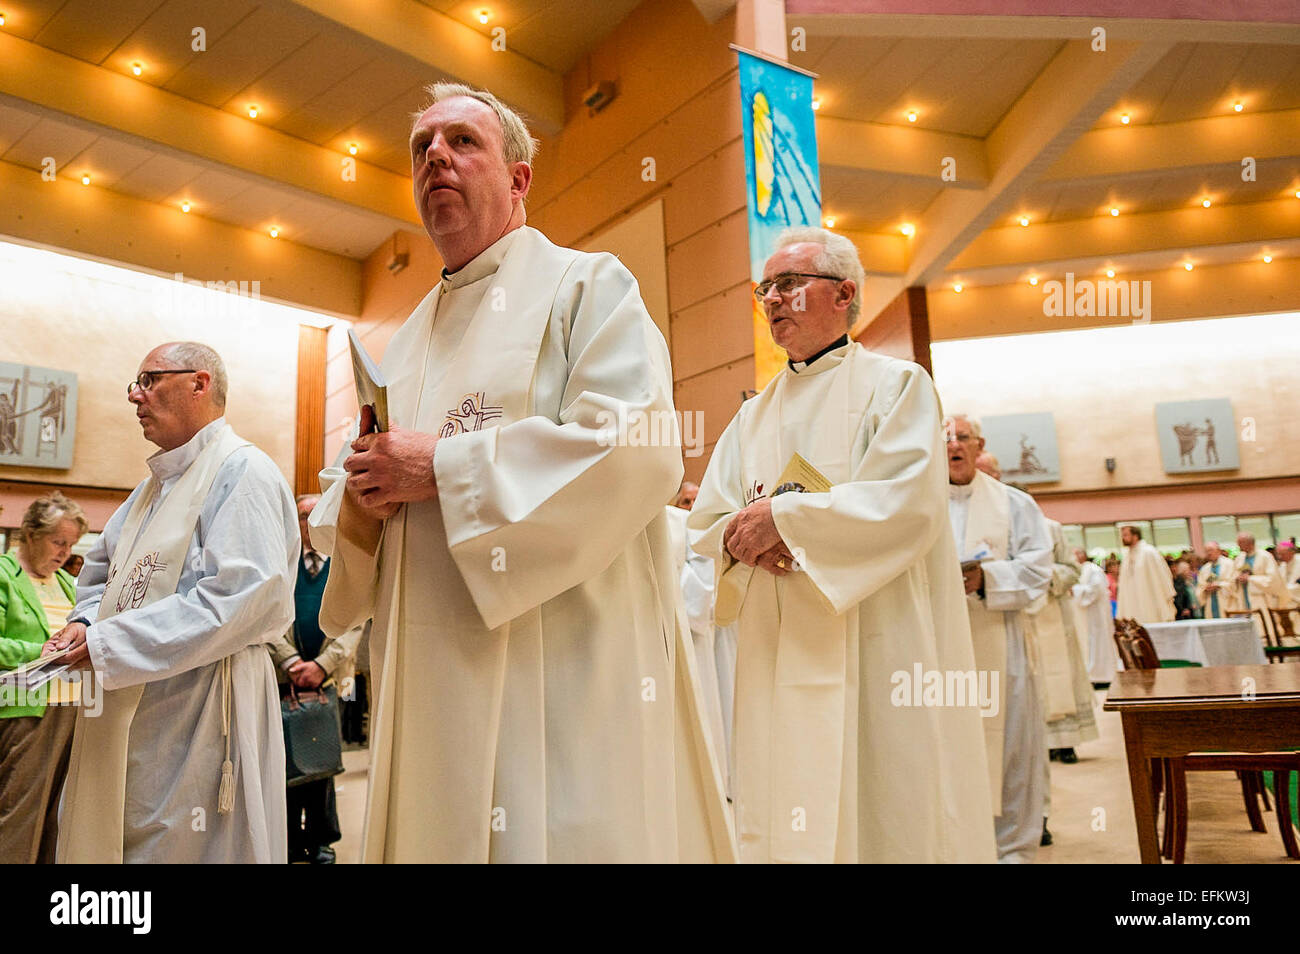 Priests wearing robes leave in line following mass. Stock Photo